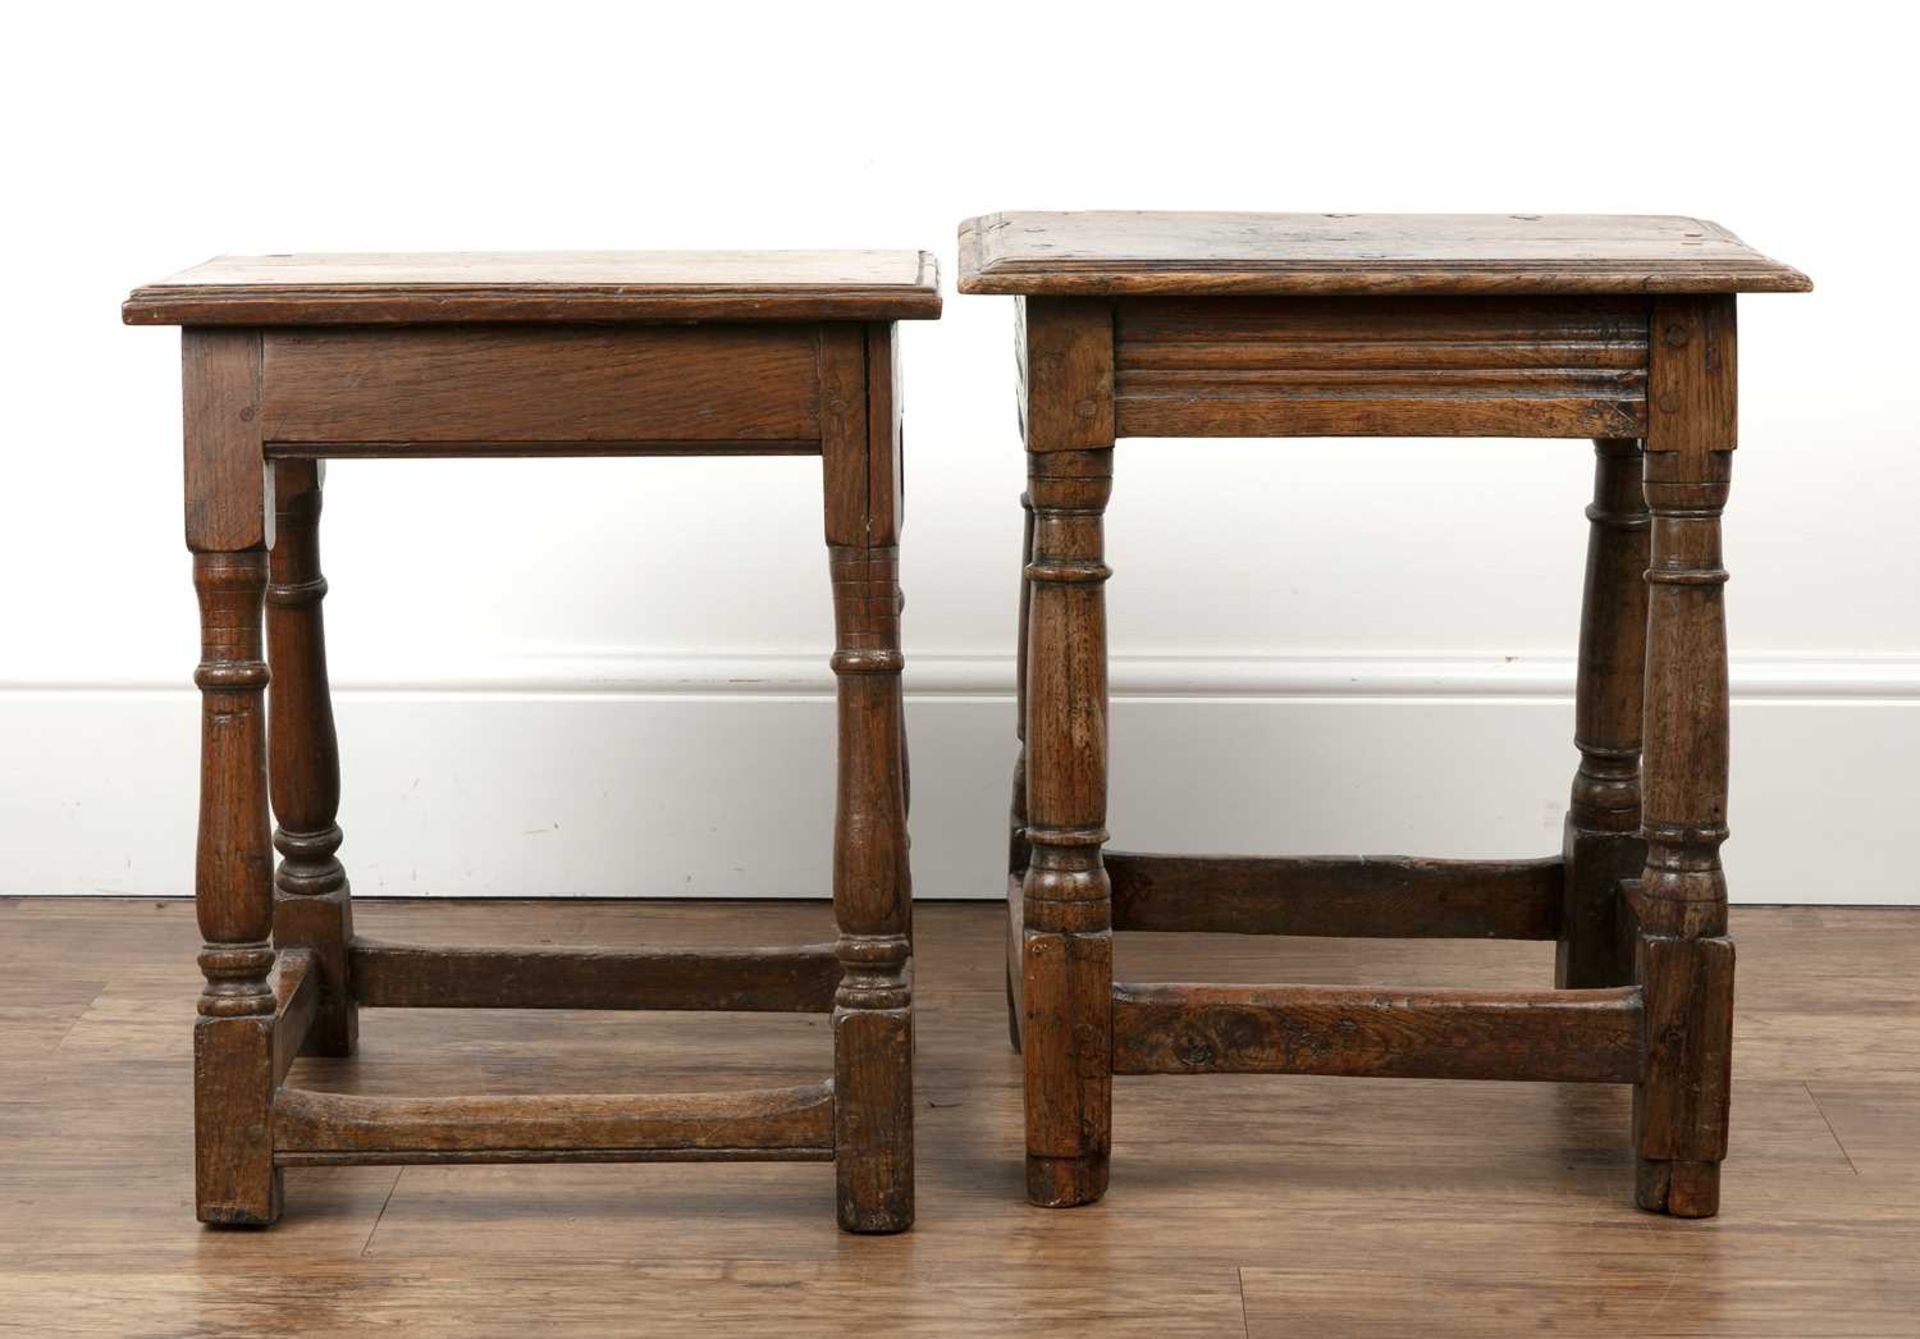 Two oak joint stools 18th Century and later, the larger example measures 44cm x 27.5cm x 51.5cm, the - Image 4 of 5